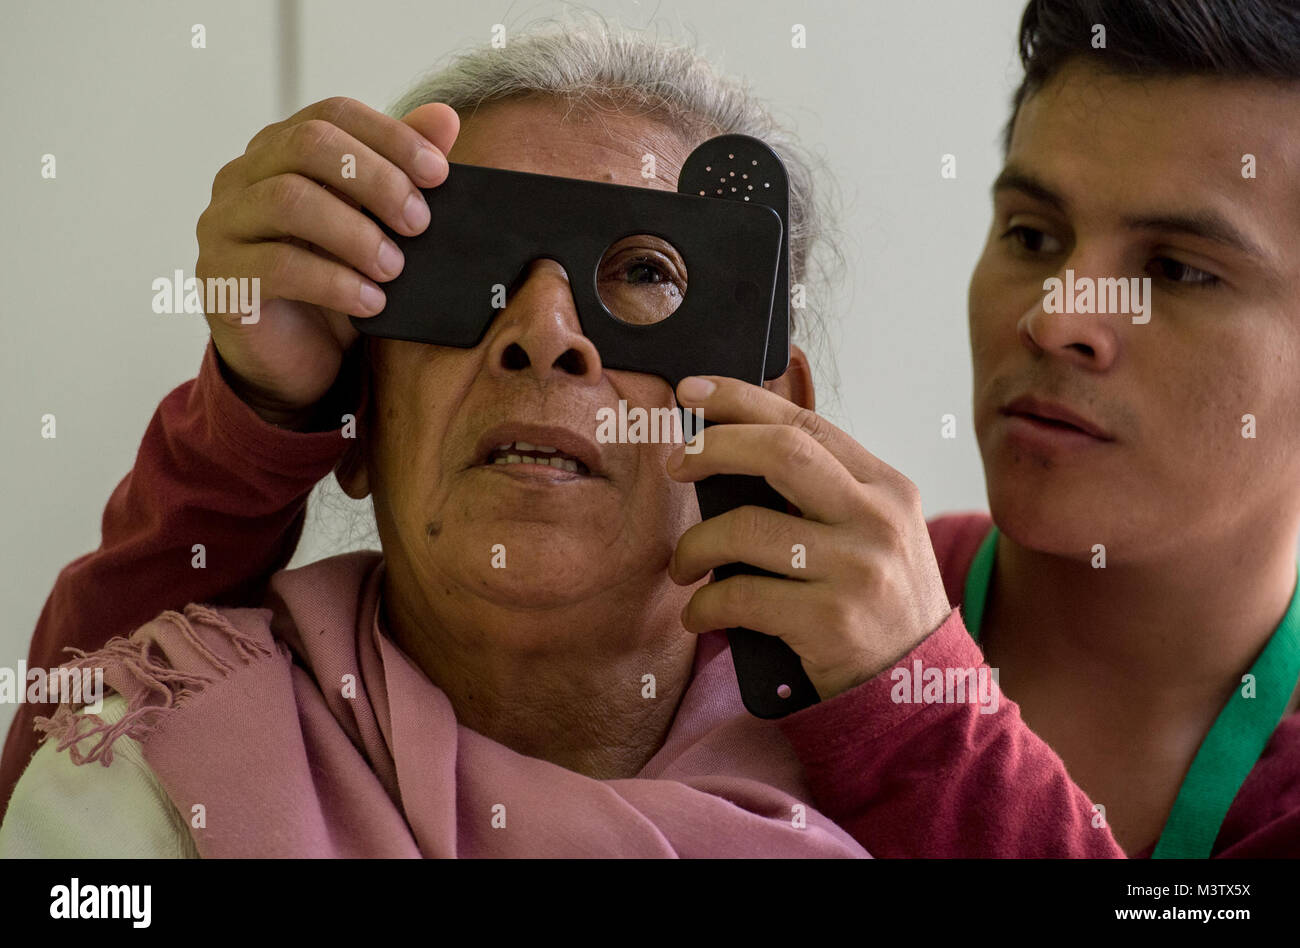 A post operation patient tries to read an eye chart, Feb. 7, 2017, after having an extracapsular cataract extraction with intraocular implant surgery at the Centro Hospitalario Luis 'Chicho' Fabrega during a medical readiness training exercise in Santiago, Panama. A U.S. military medical team was in Panama to help treat individuals with cataracts that otherwise would have gone untreated. Medical readiness training exercises provide U.S. military personnel training in delivery of medical care in austere conditions, promote diplomatic relations between the U.S. and host nations in Central Americ Stock Photo